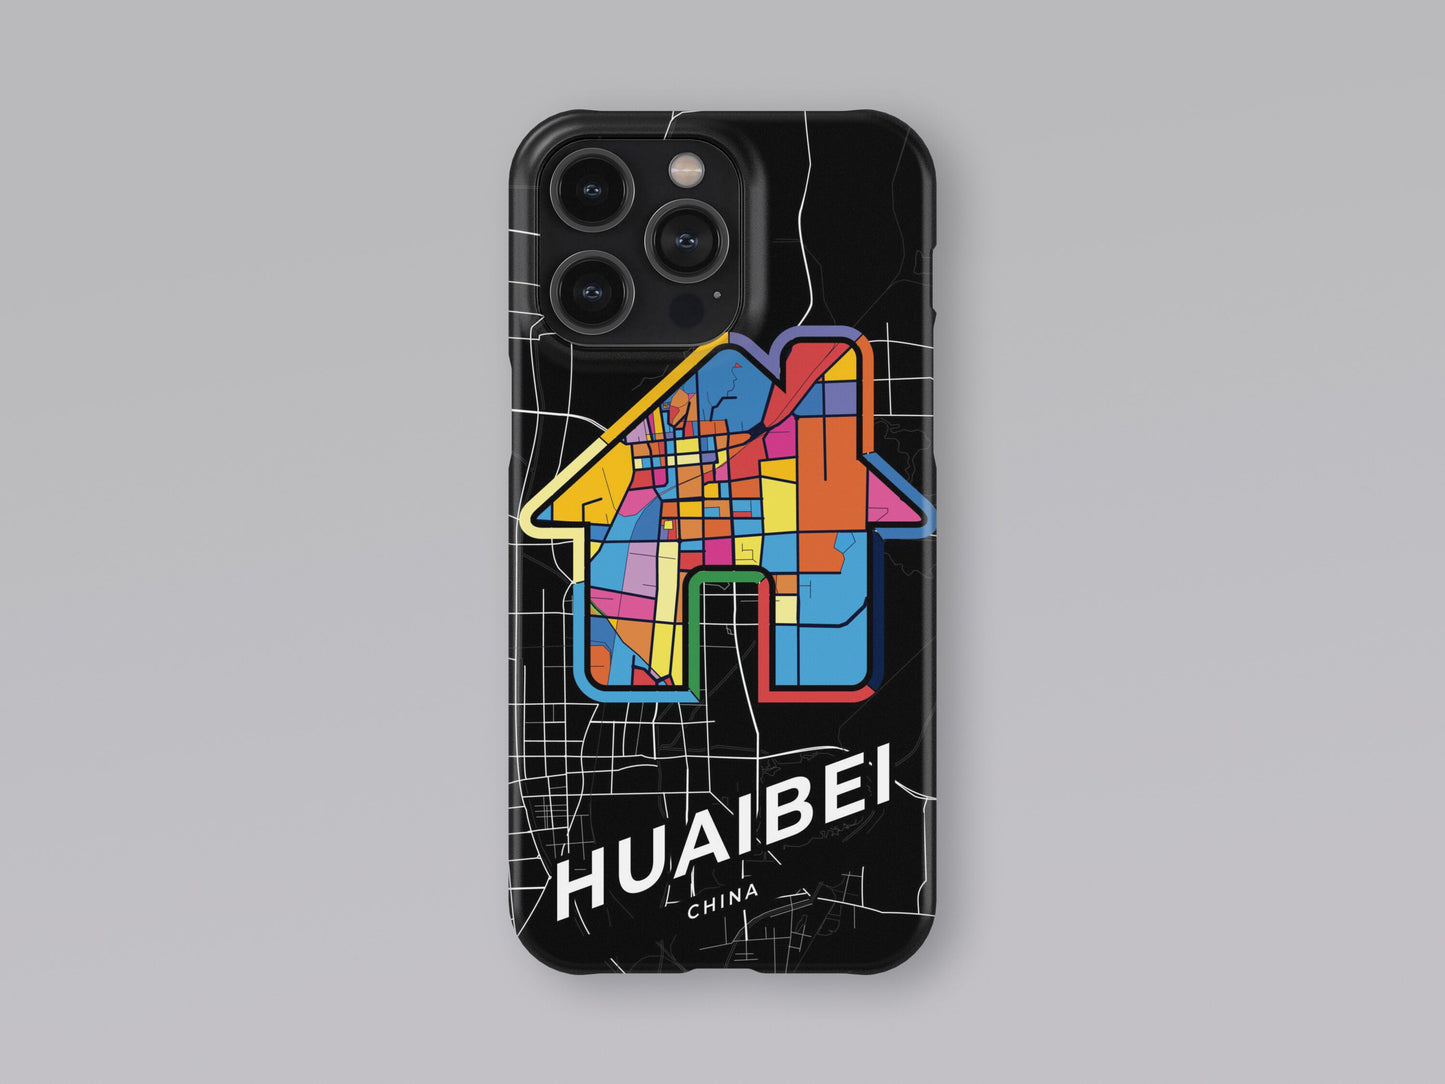 Huaibei China slim phone case with colorful icon. Birthday, wedding or housewarming gift. Couple match cases. 3